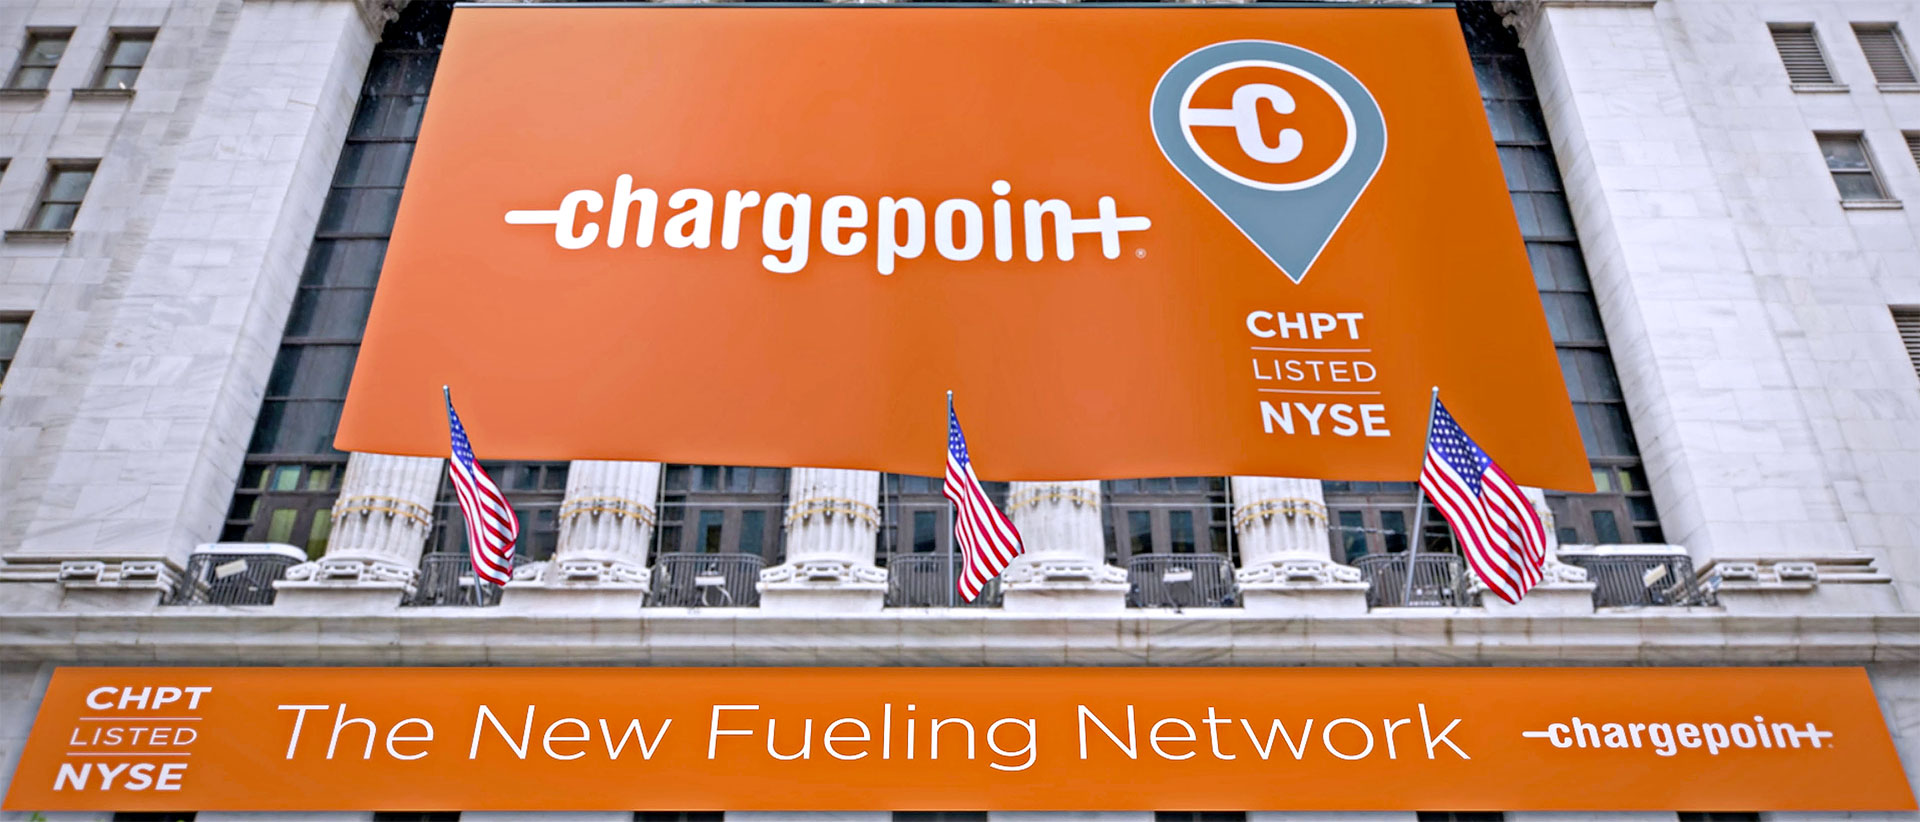 Chargepoint Banner NYSE New York Stock Exchange Michael Kerr English Interview Stories SOU